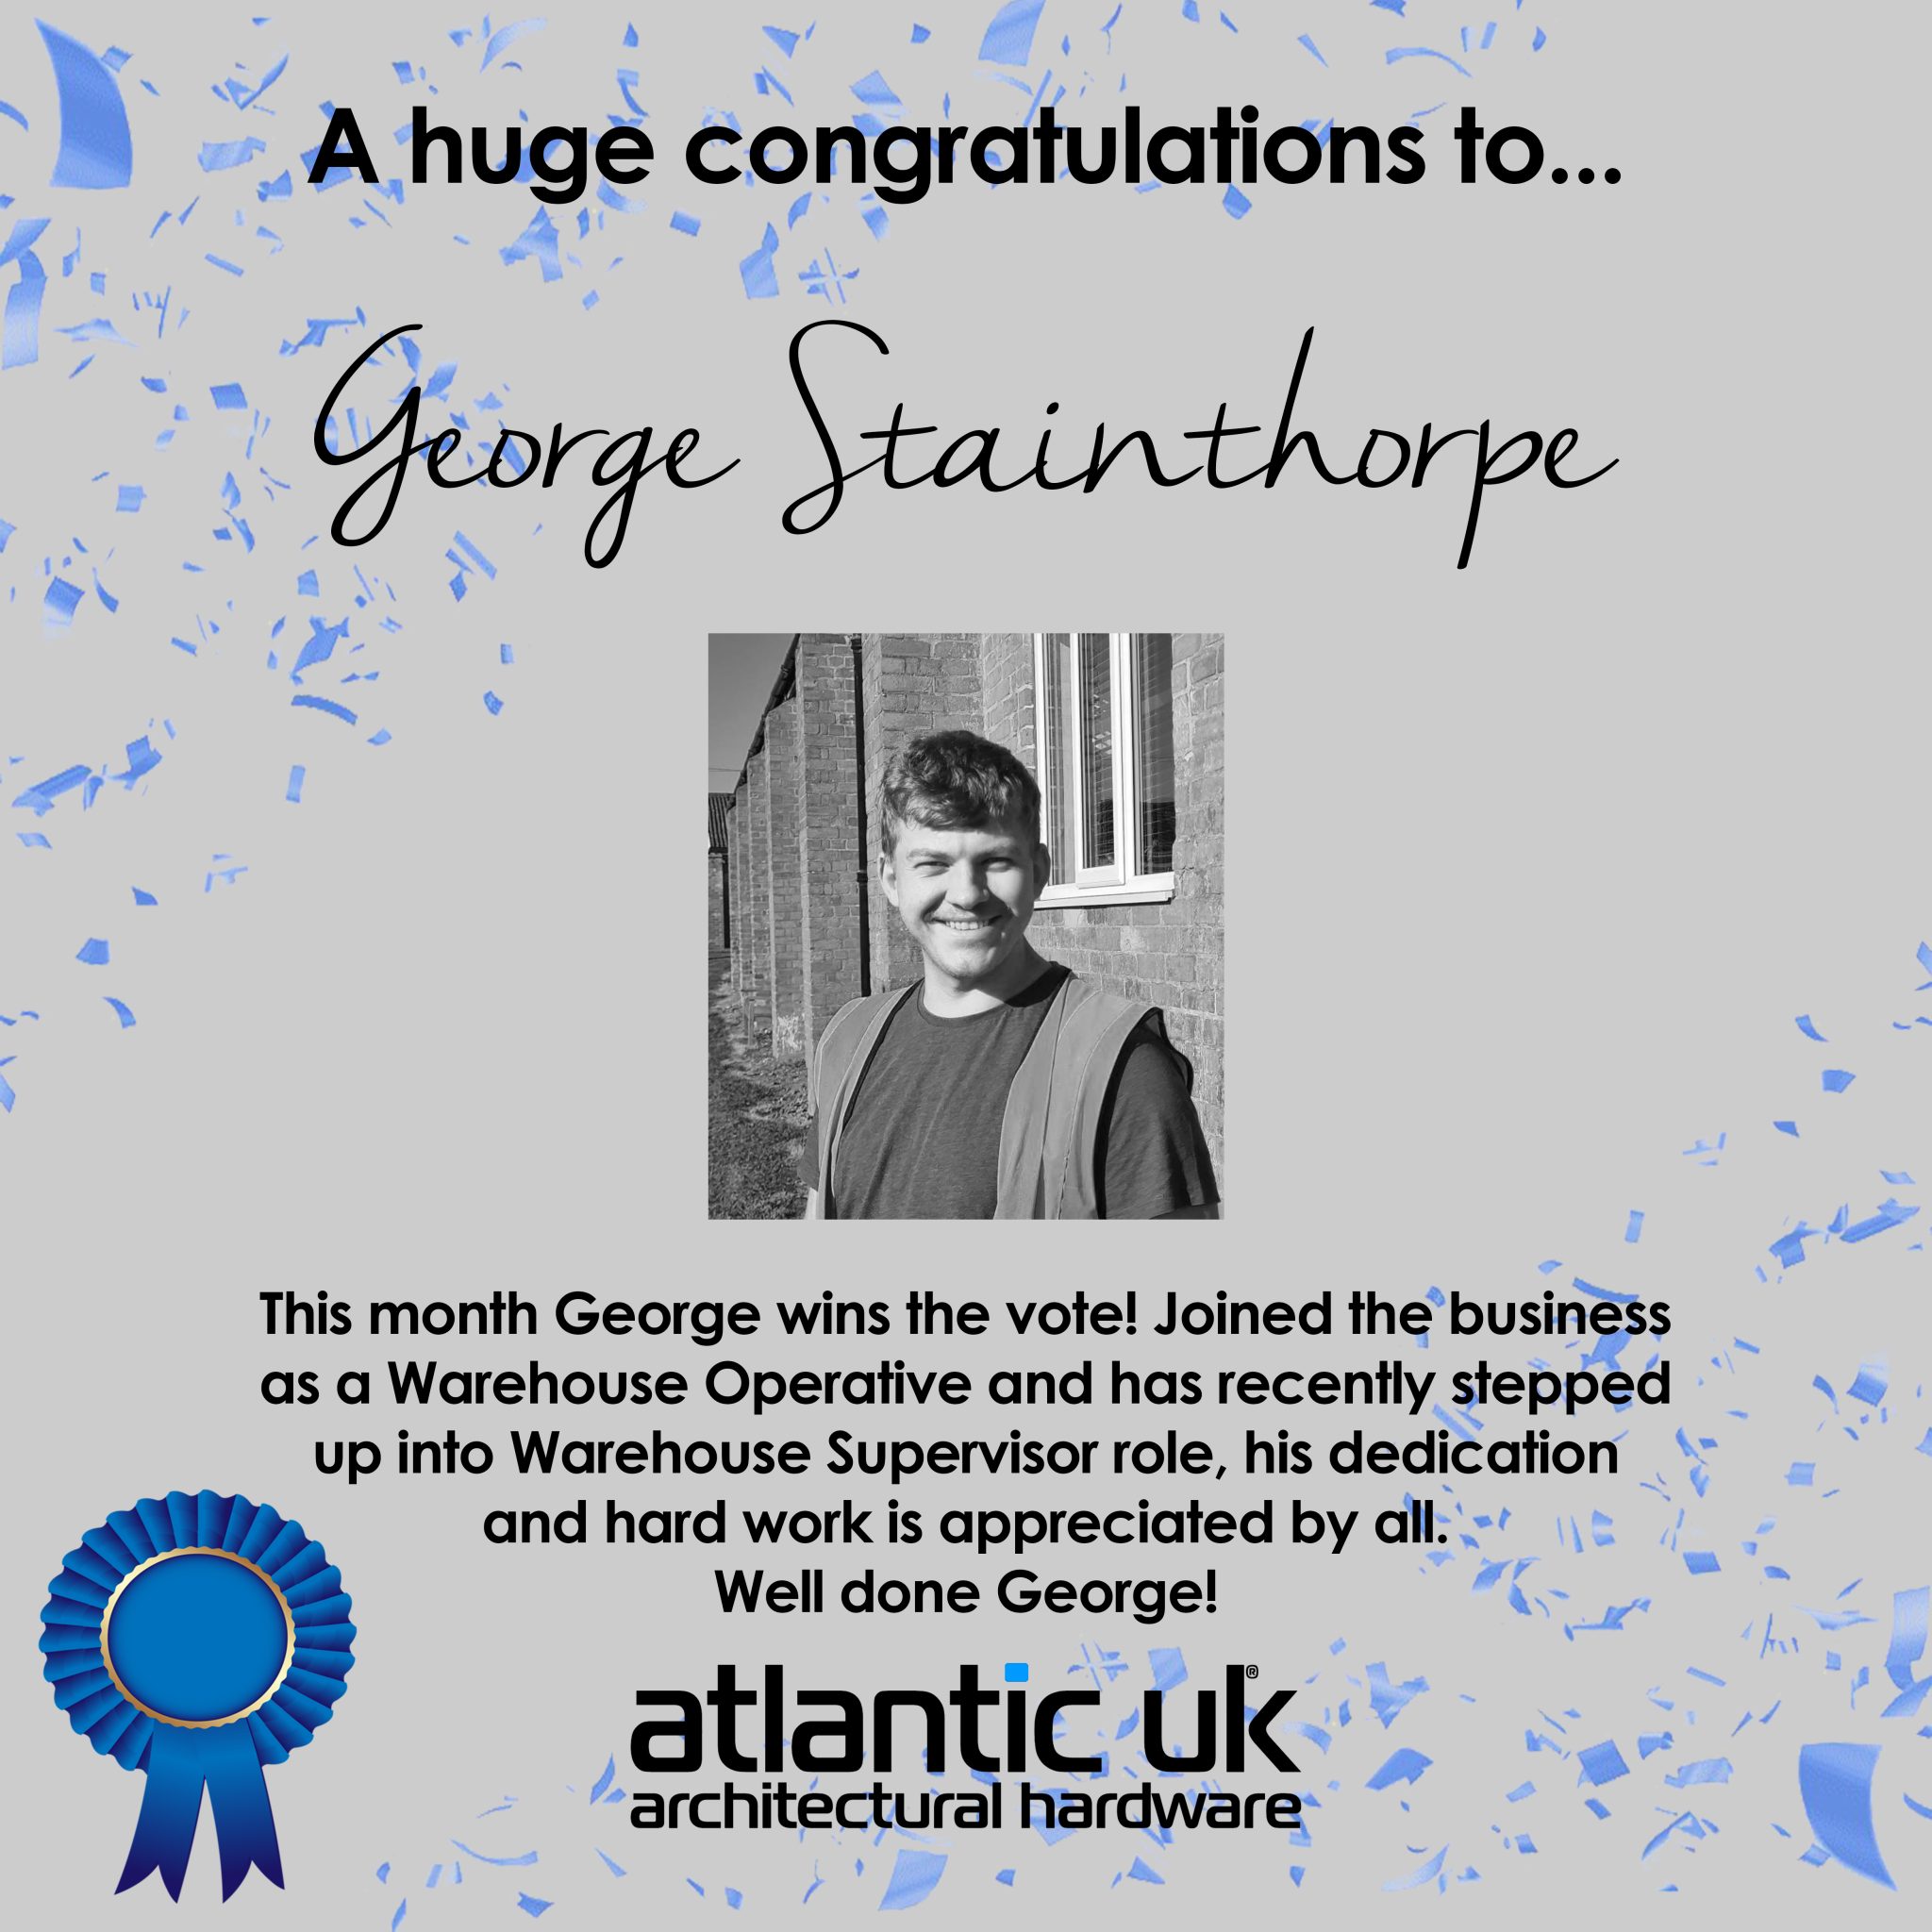 Congratulations George! Employee of the month for August!